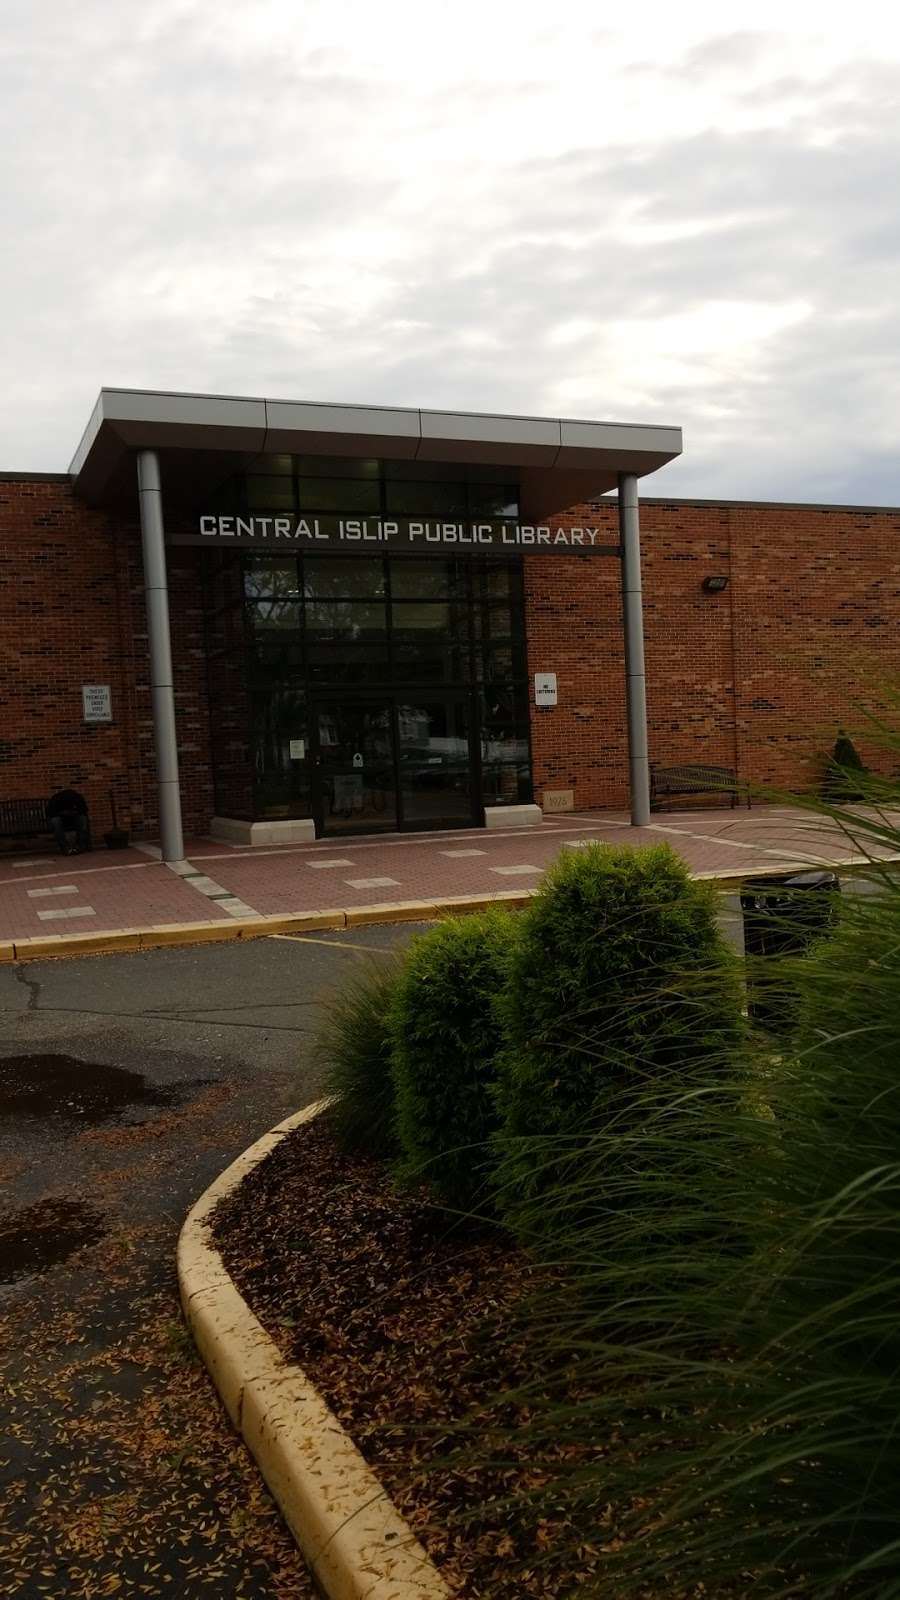 Central Islip Public Library | 33 Hawthorne Ave, Central Islip, NY 11722 | Phone: (631) 234-9333